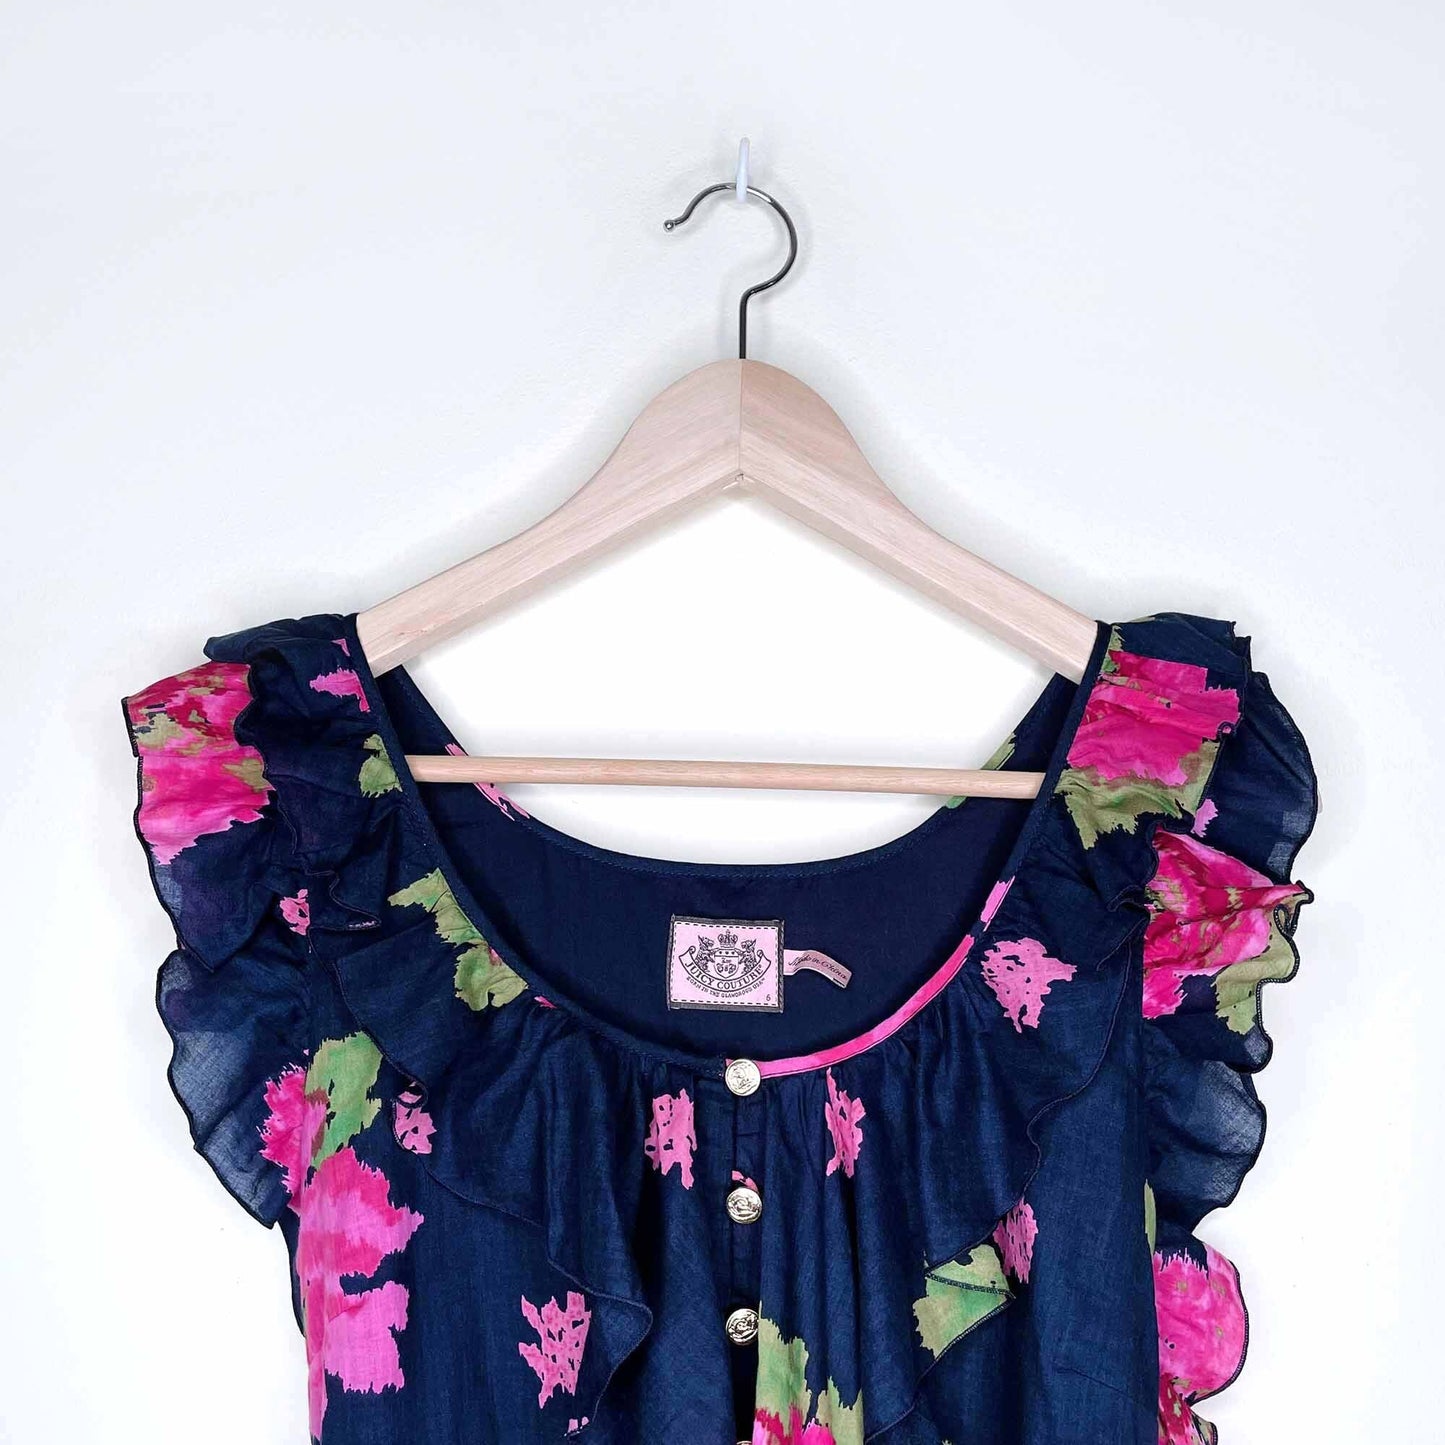 juicy couture floral dress with ruffle necklie and tie waist - size 6